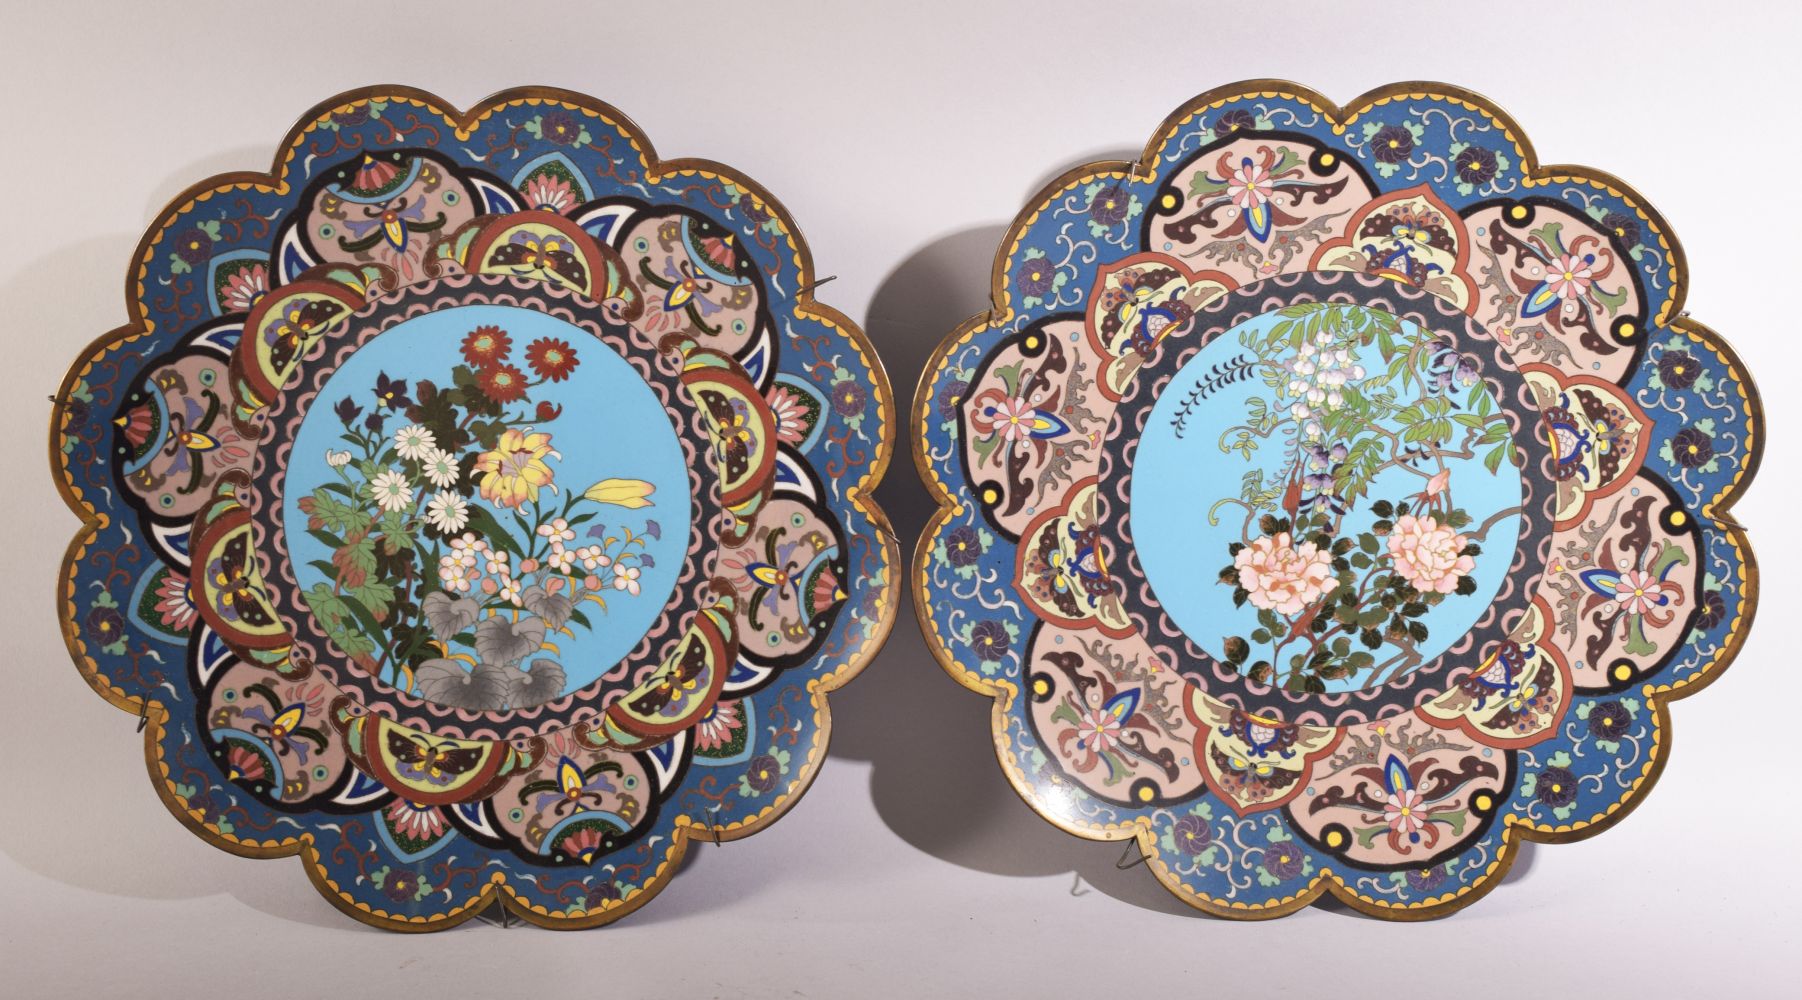 A PAIR OF JAPANESE FLOWER SHAPED CLOISONNE DISHES, decorated with native flora, stylised floral